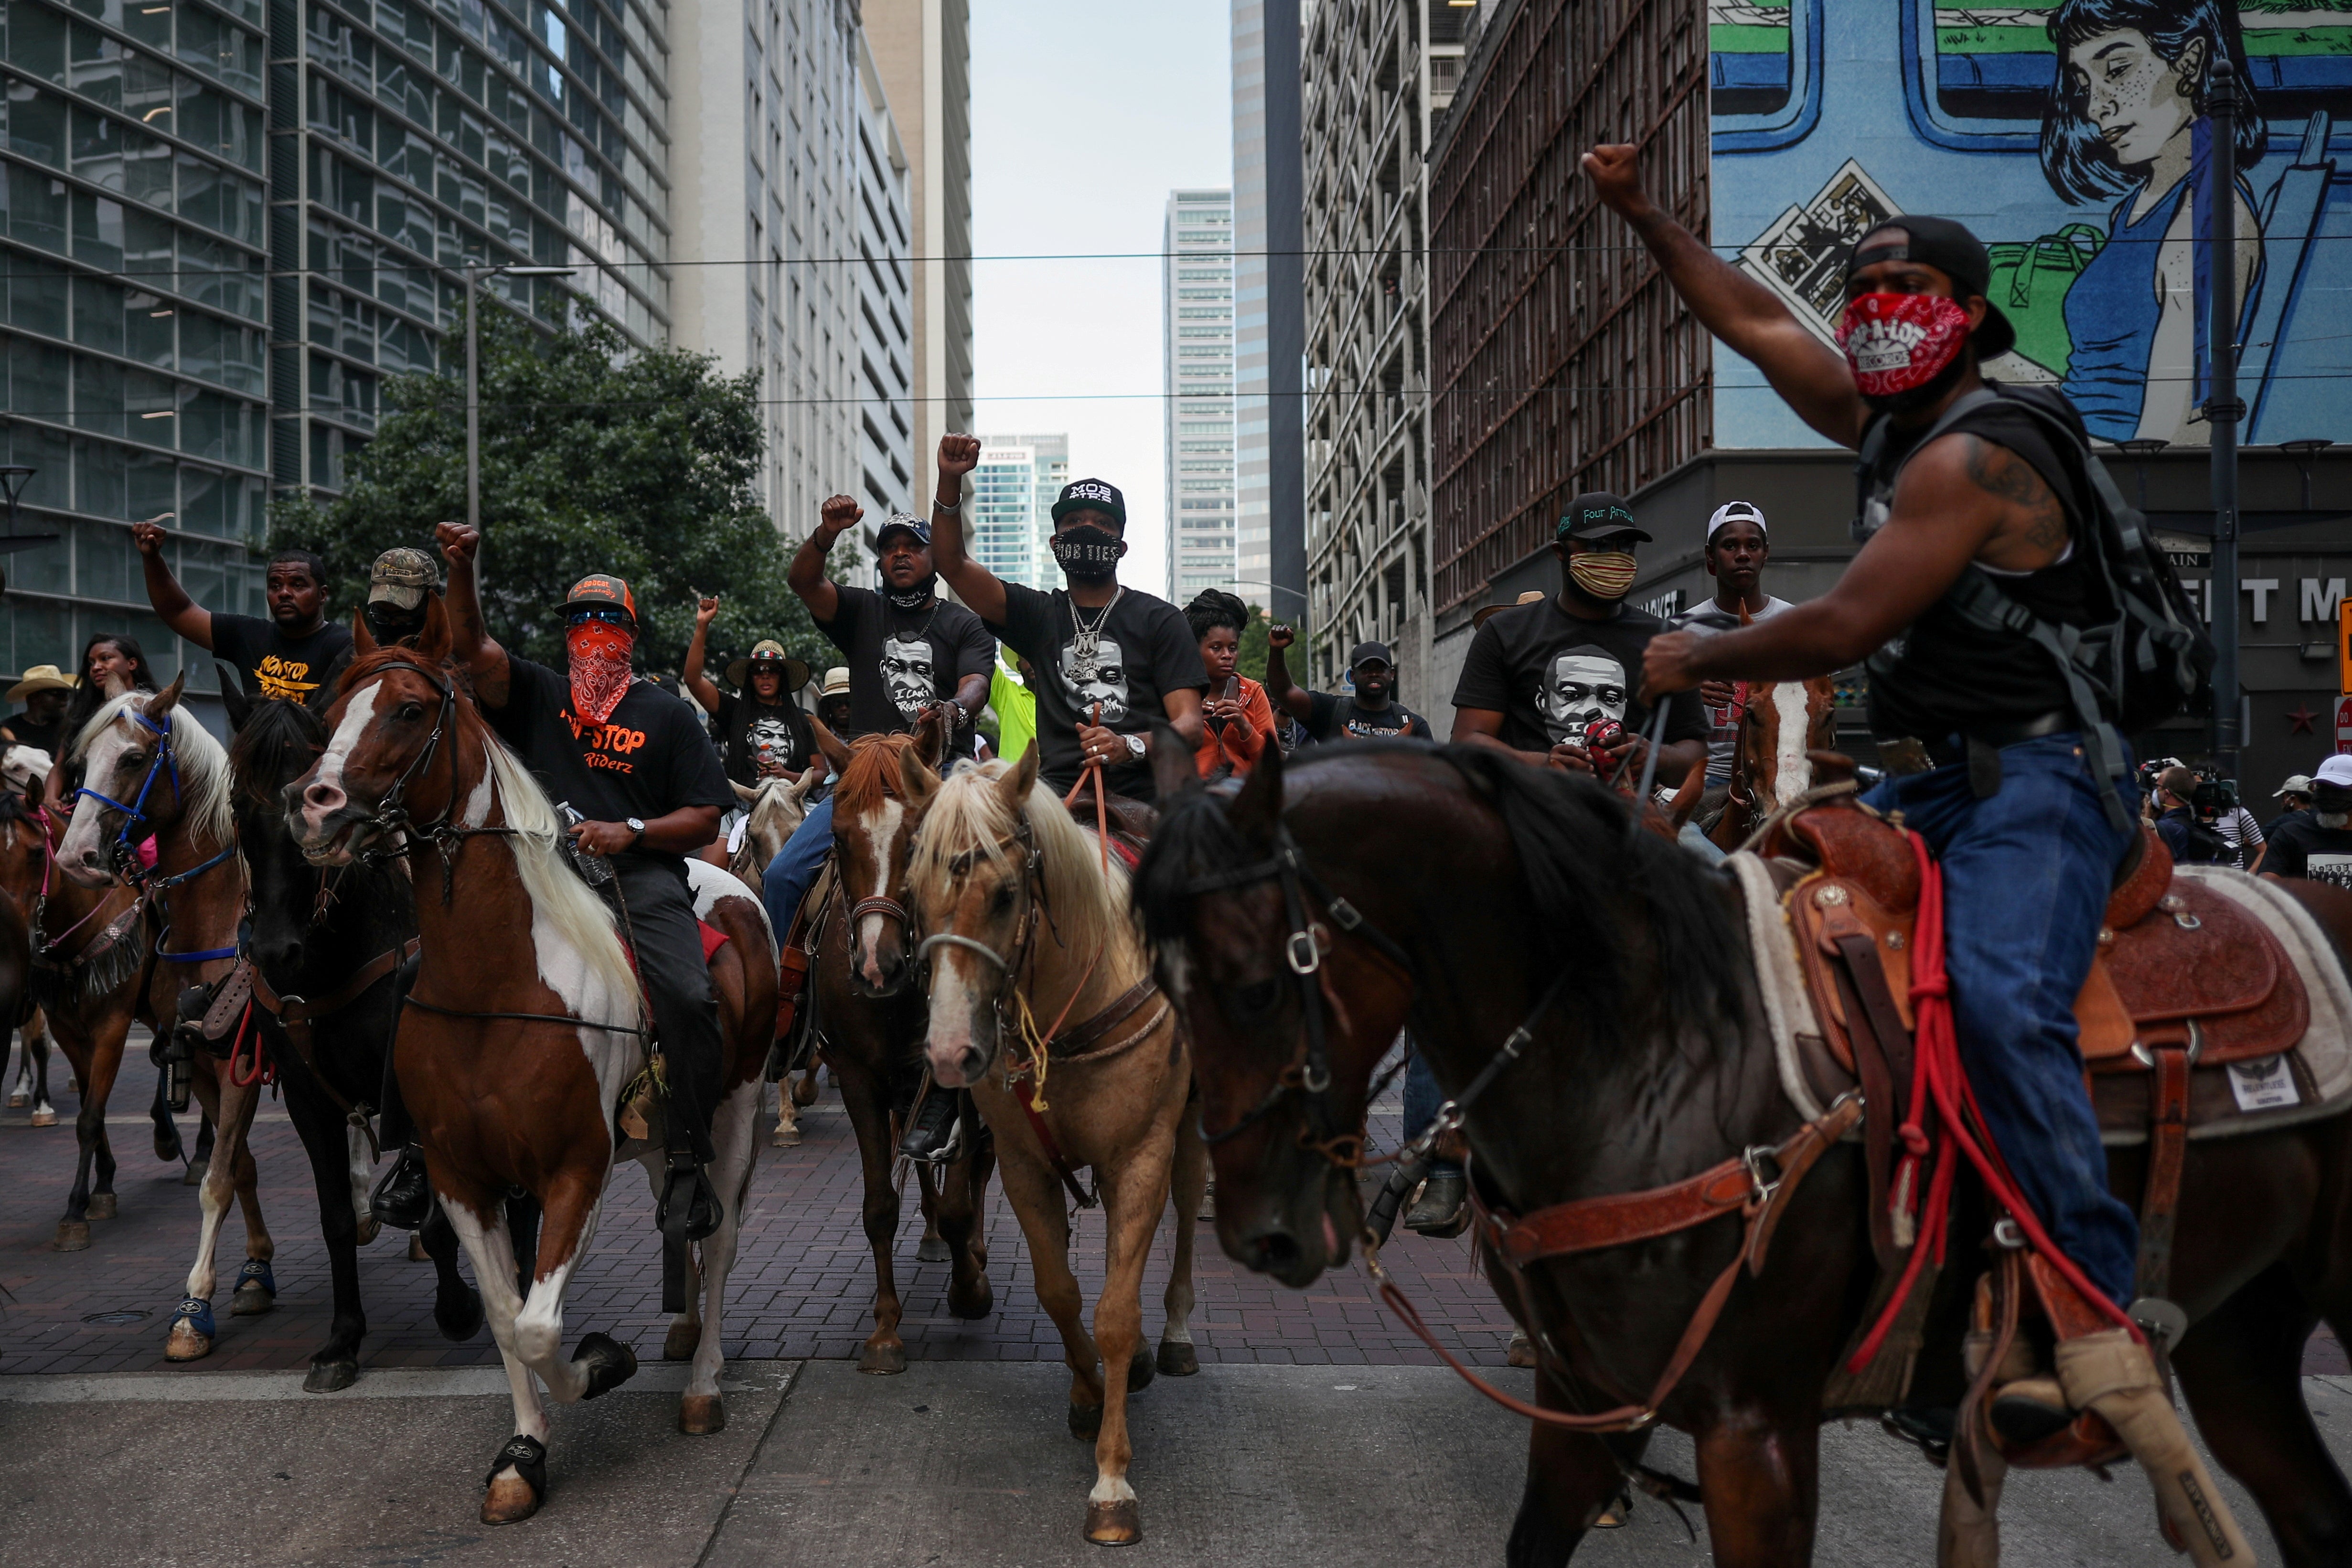 Protesters on horseback in downtown Houston, Texas, rally in June against the murder of George Floyd